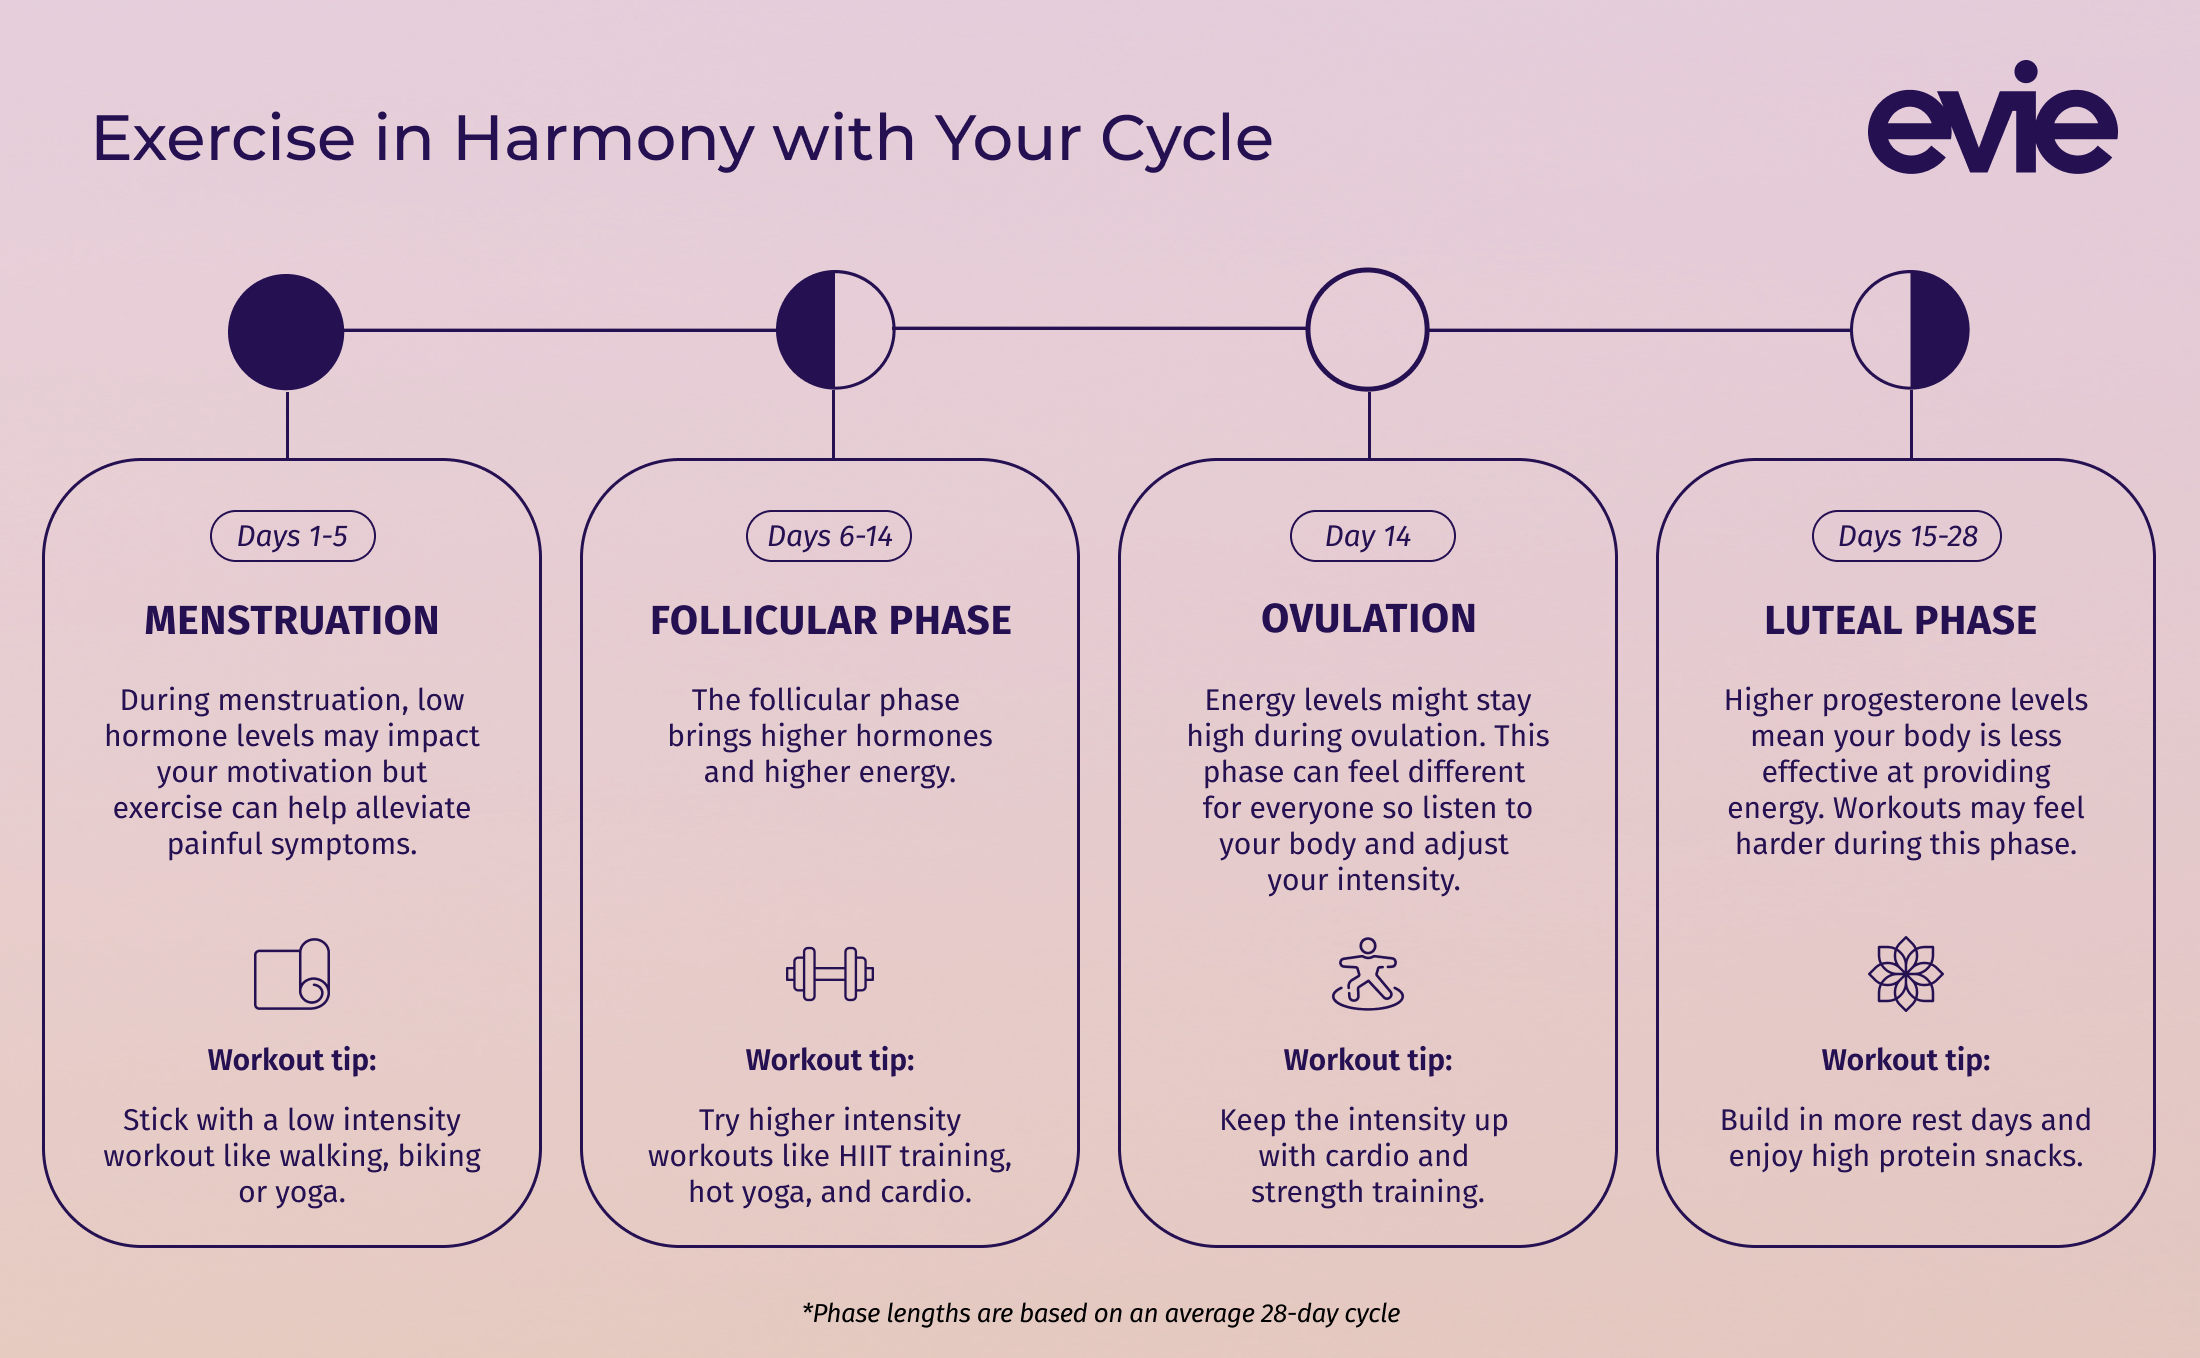 How to exercise in harmony with your menstrual cycle